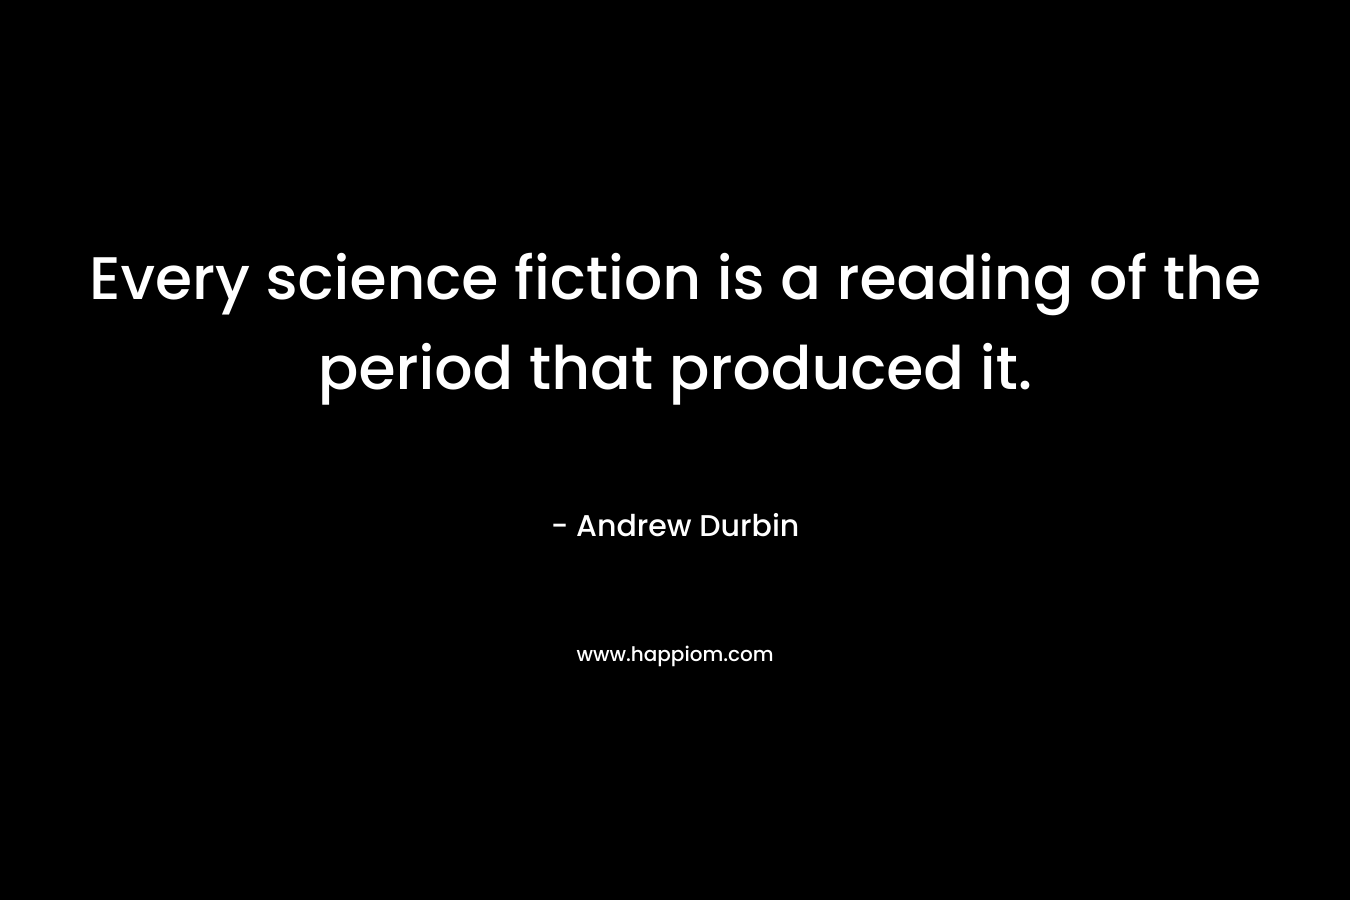 Every science fiction is a reading of the period that produced it.